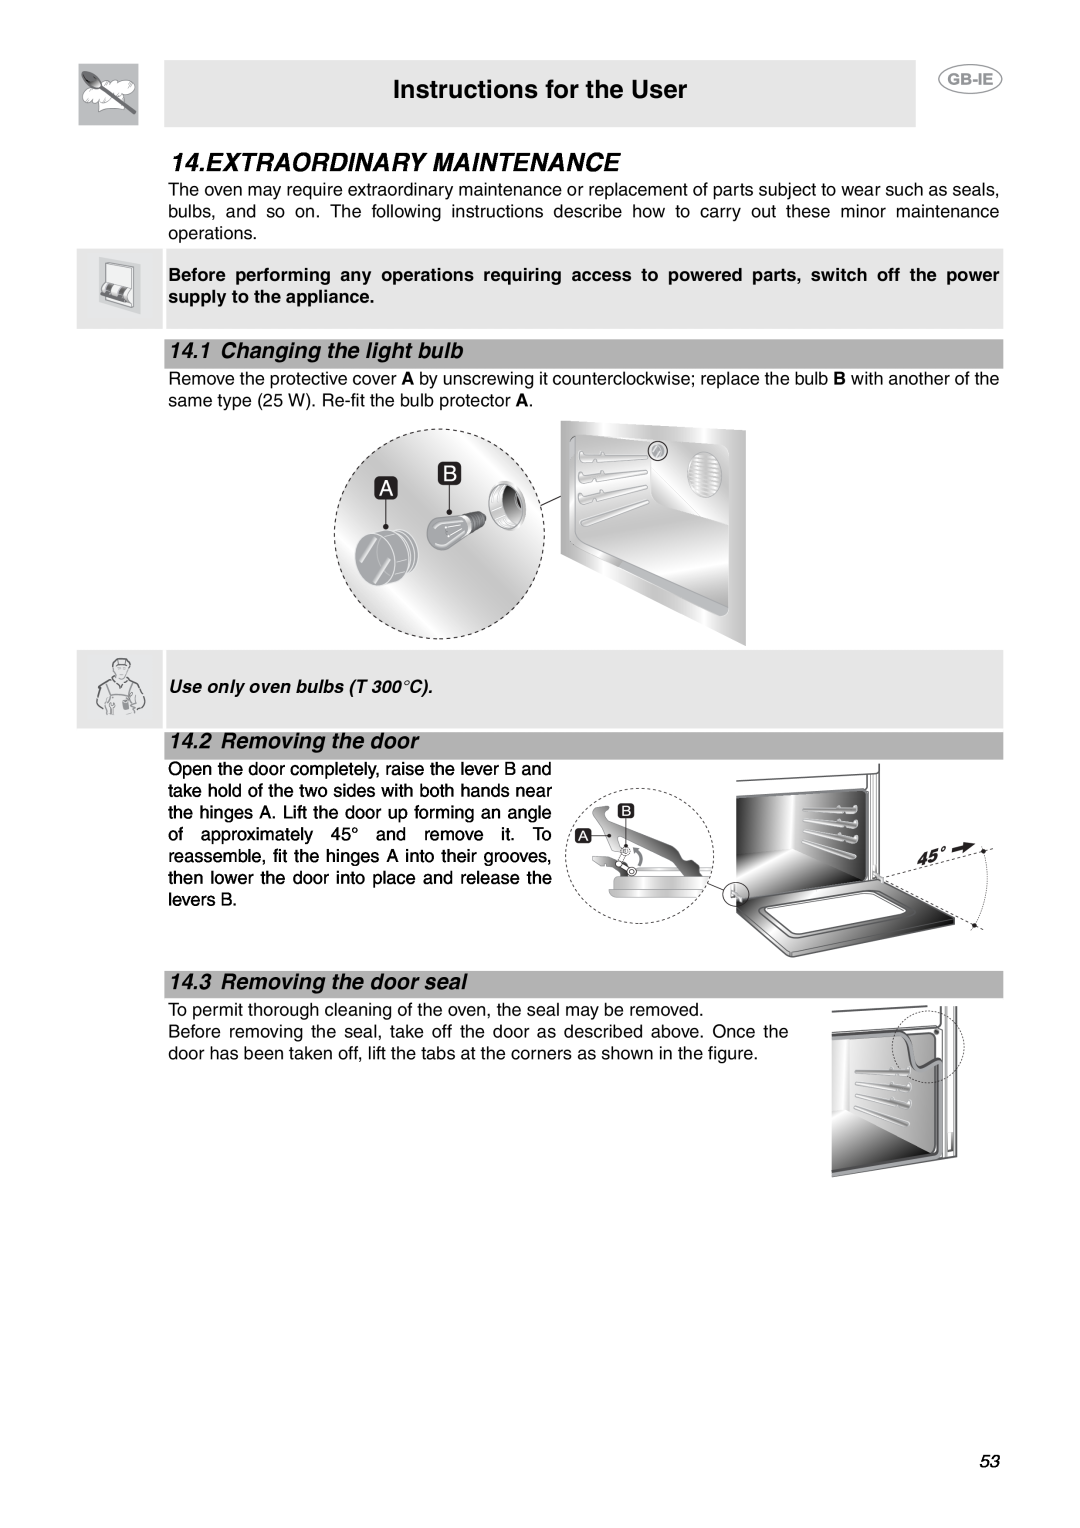 Smeg CE6IMX Extraordinary Maintenance, Changing the light bulb, Removing the door seal, Instructions for the User 